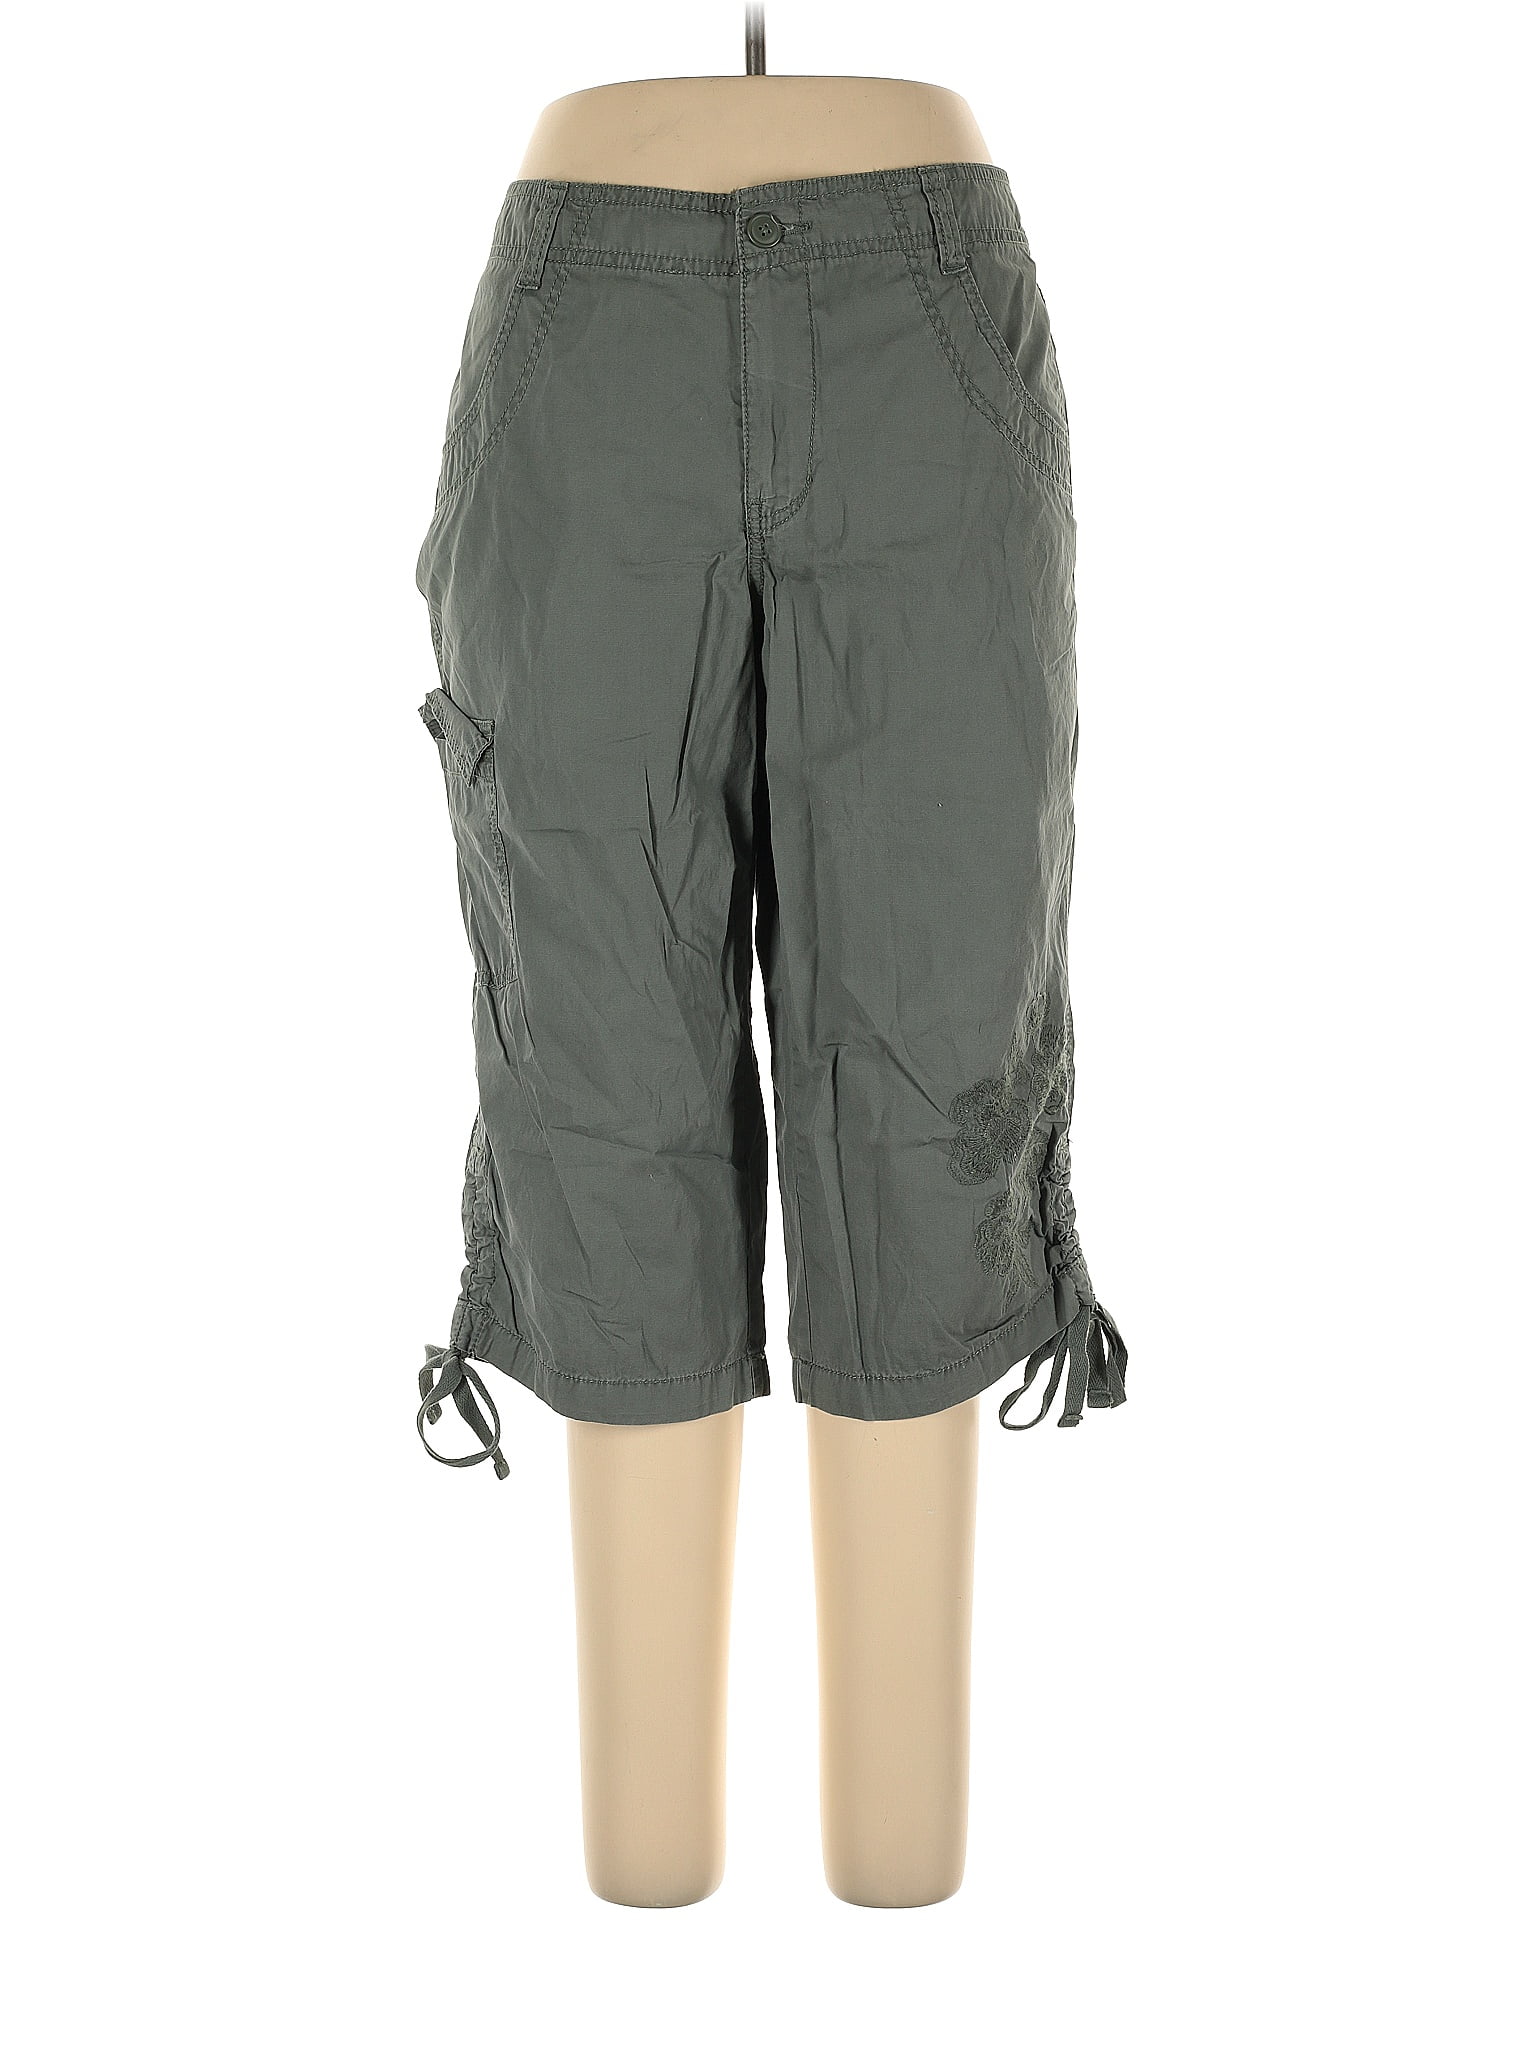 Faded Glory 100% Cotton Solid Green Cargo Pants Size 16 - 36% off